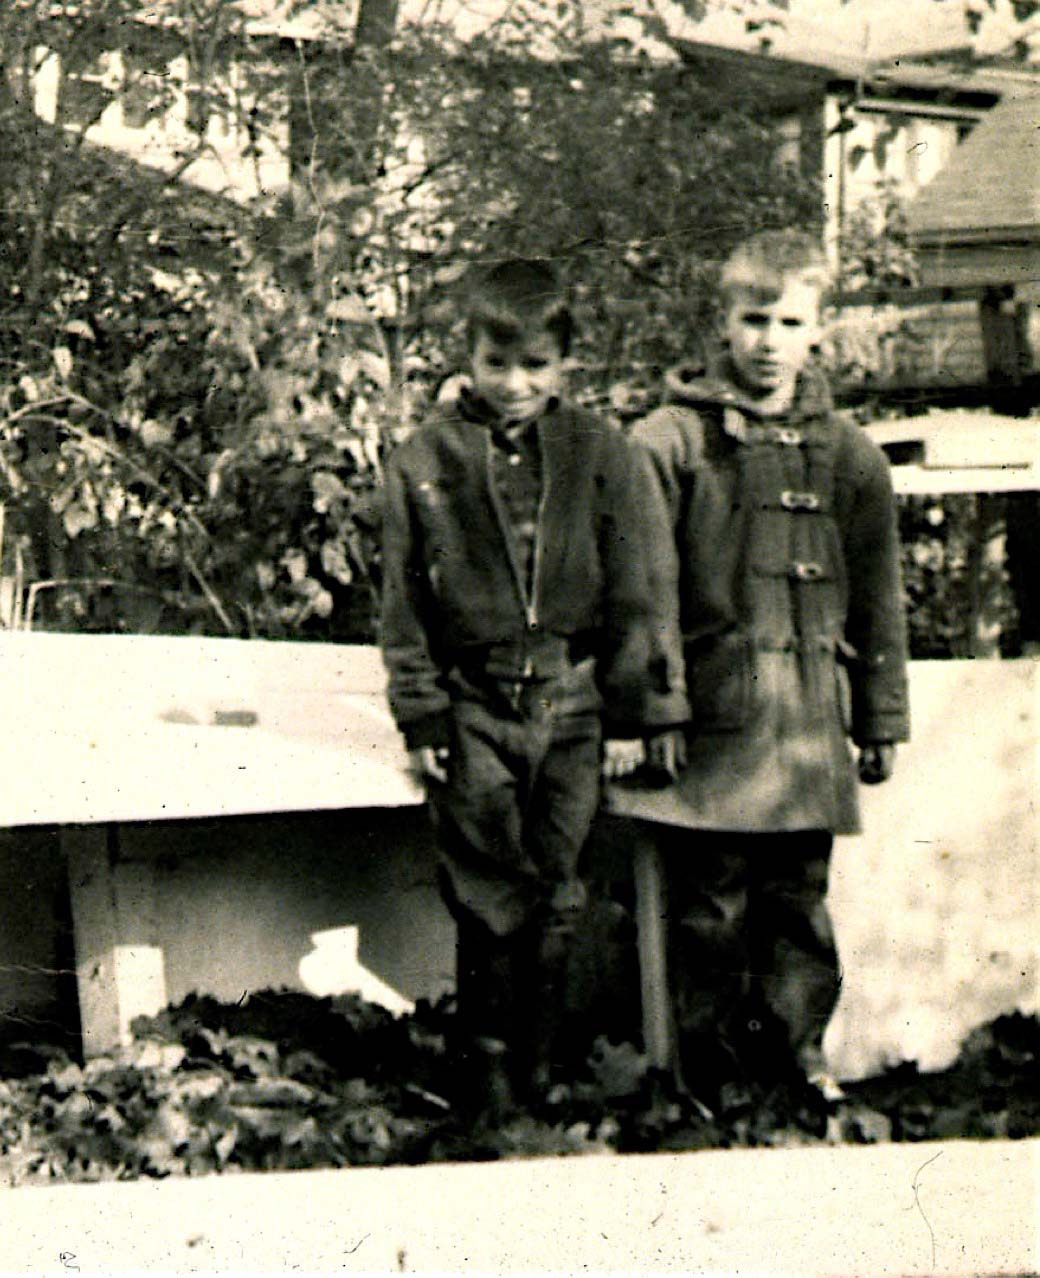 Rick and a friend pose infront of a backyard house he build as a child